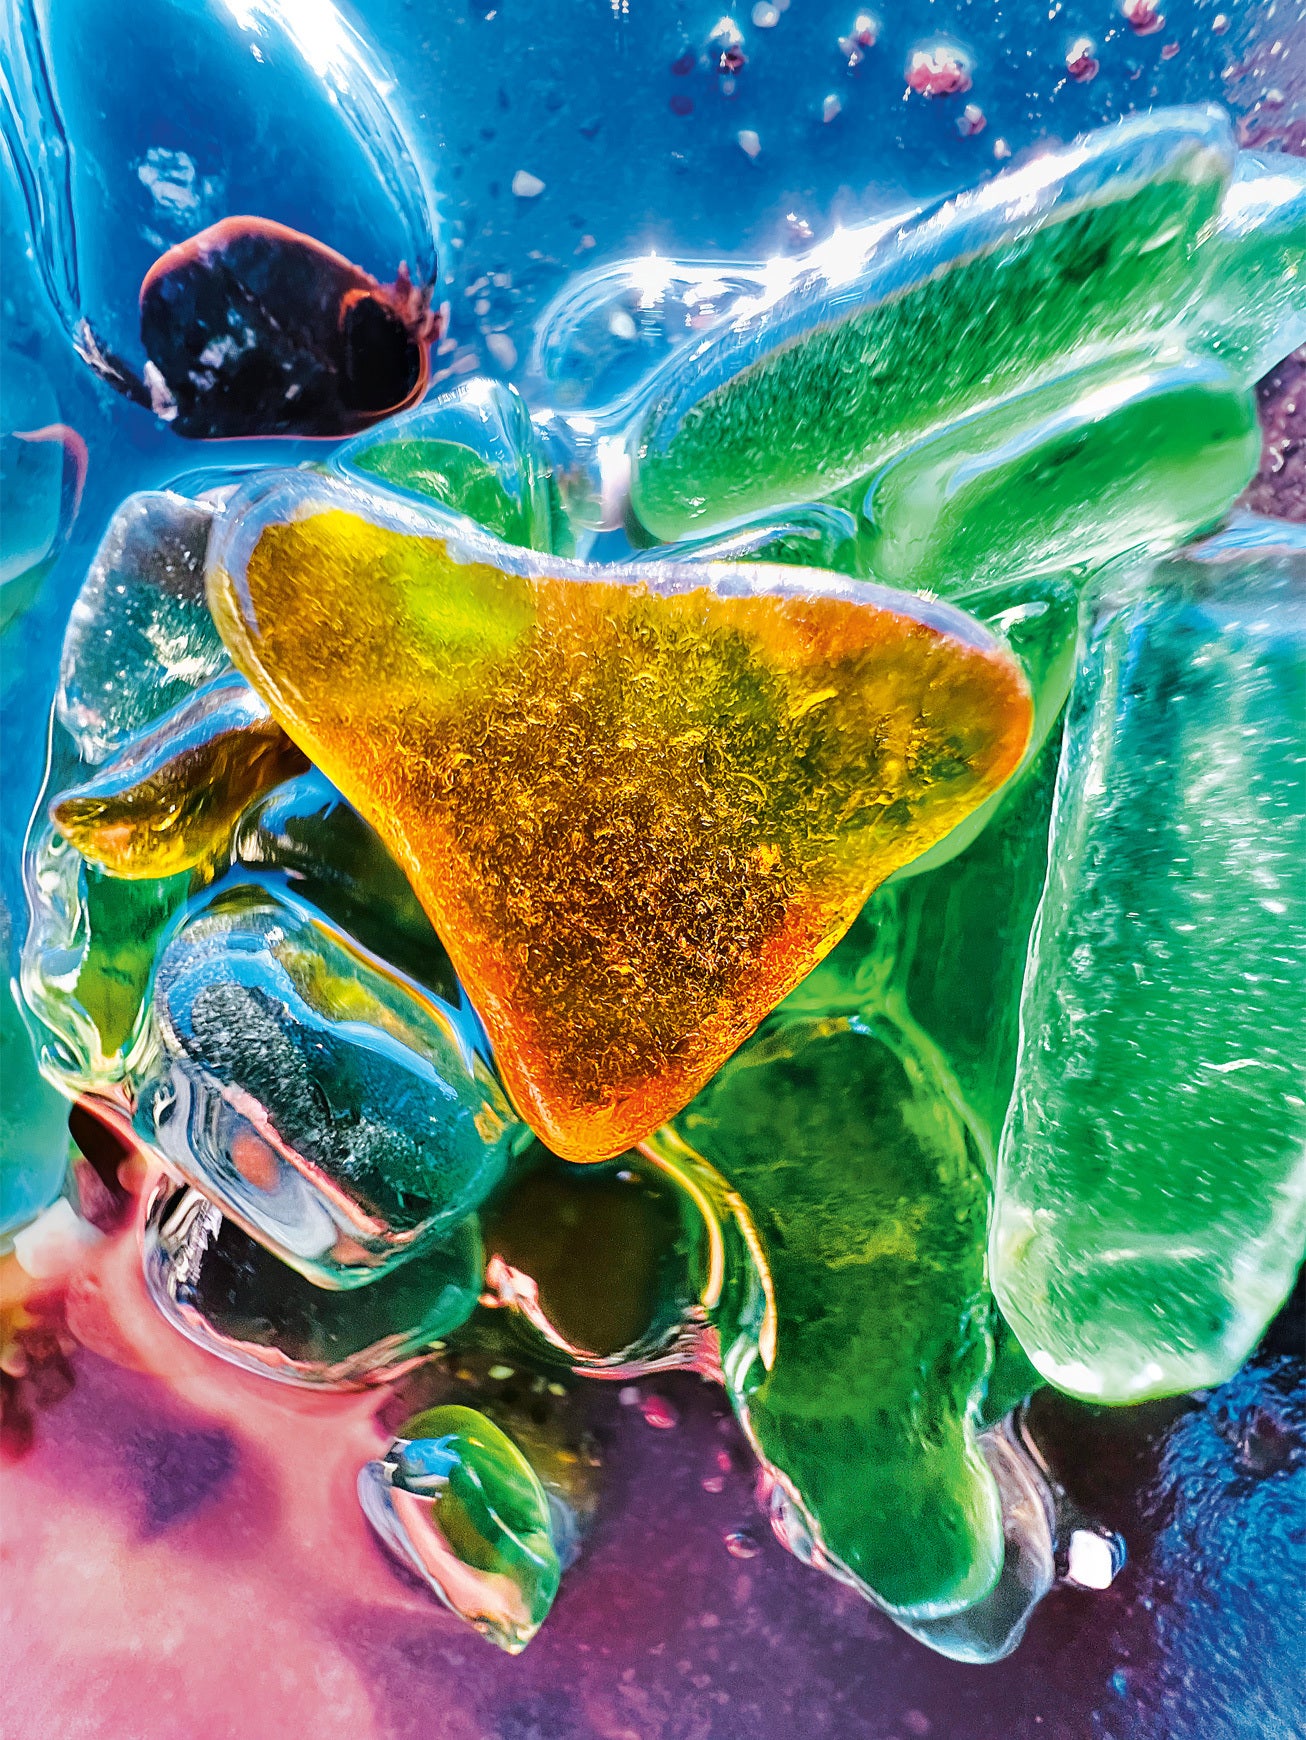 “Sea Glass” by Guido Cassanelli - Take a look at the winners of the &#039;Shot on iPhone&#039; iPhone 13 Pro macro challenge announced by Apple